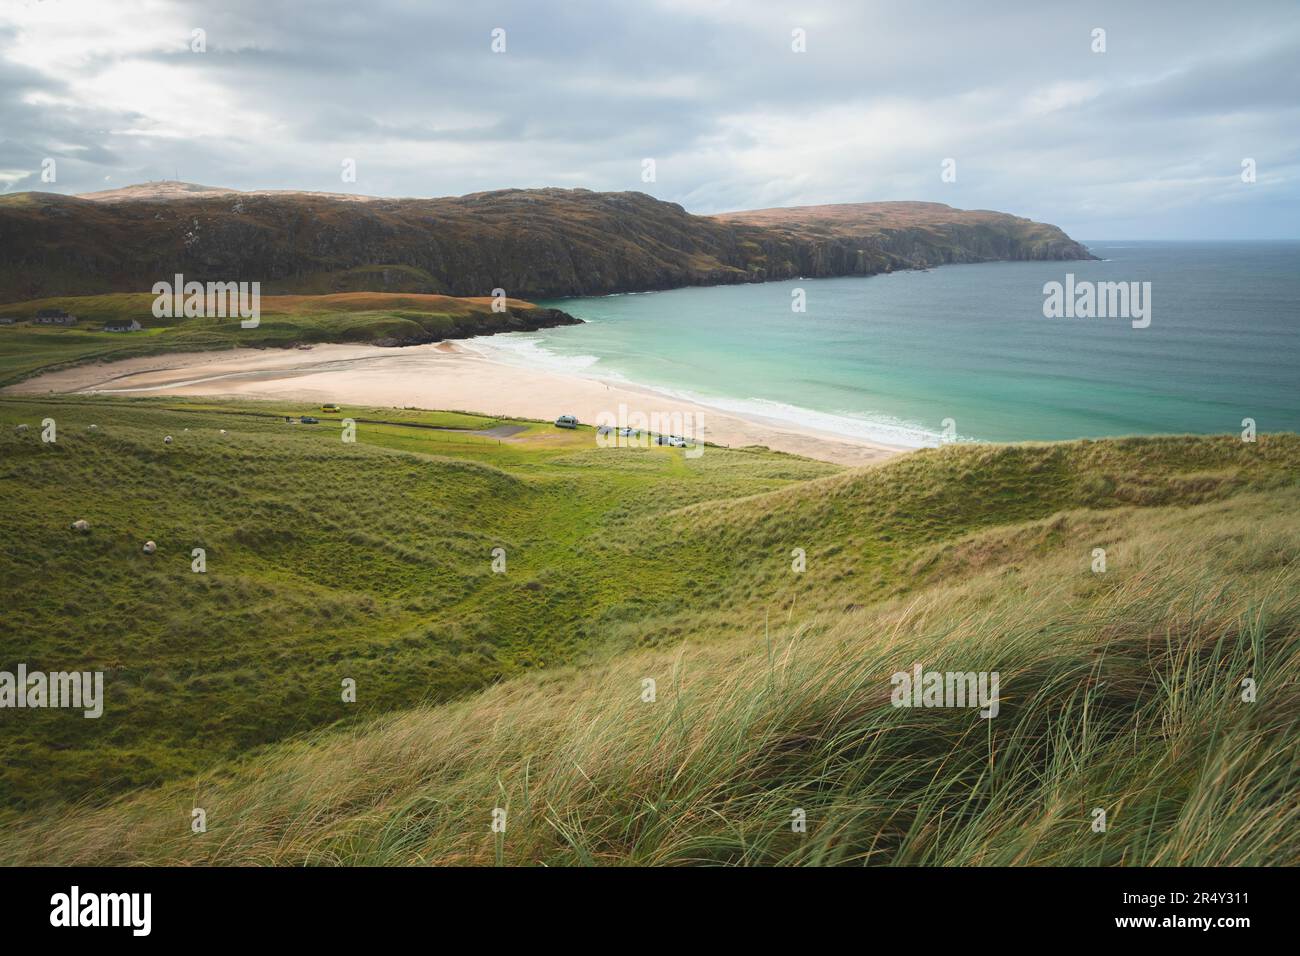 Beautiful seascape landscape over headland and sandy bay at Reef Beach on the Isle of Lewis and Harris in the Outer Hebrides of Scotland, UK. Stock Photo